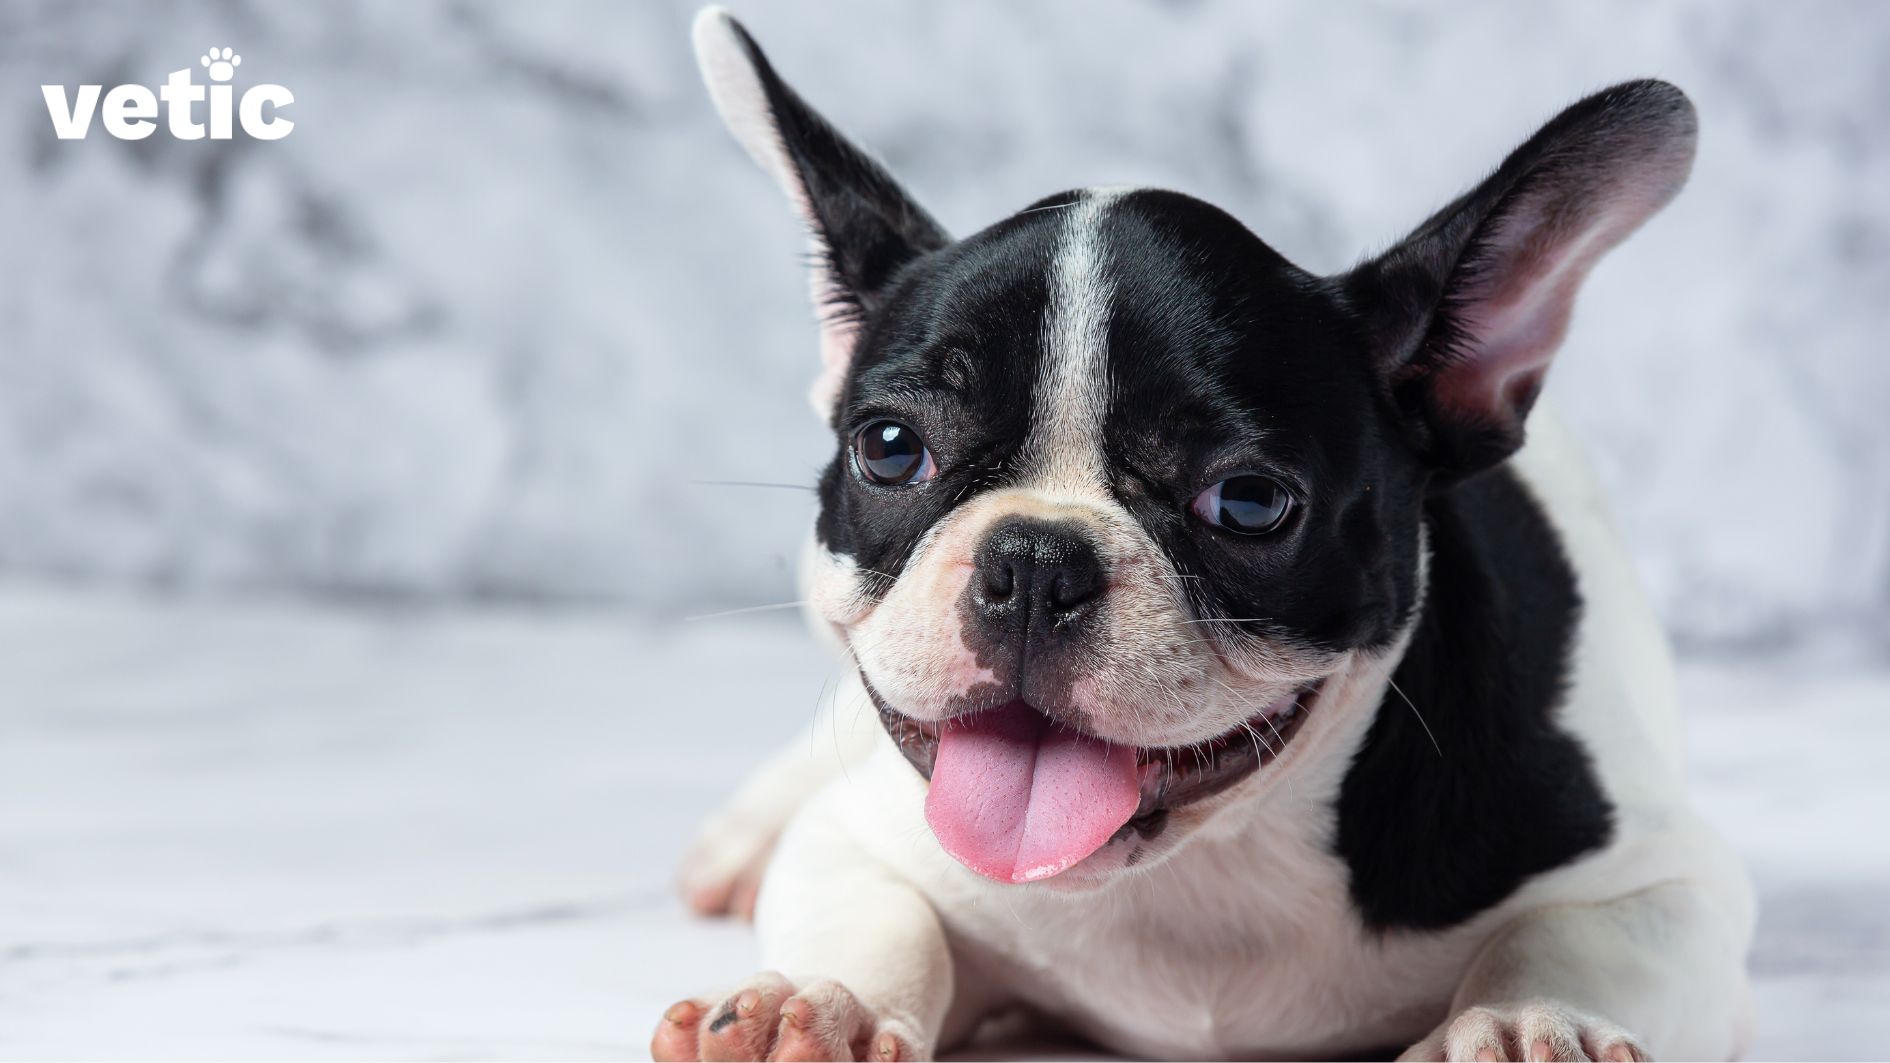 front closeup view of a French bulldog pup. It's a flat-faced dog that has severe health issues involving its teeth, breathing, eyes and ears.